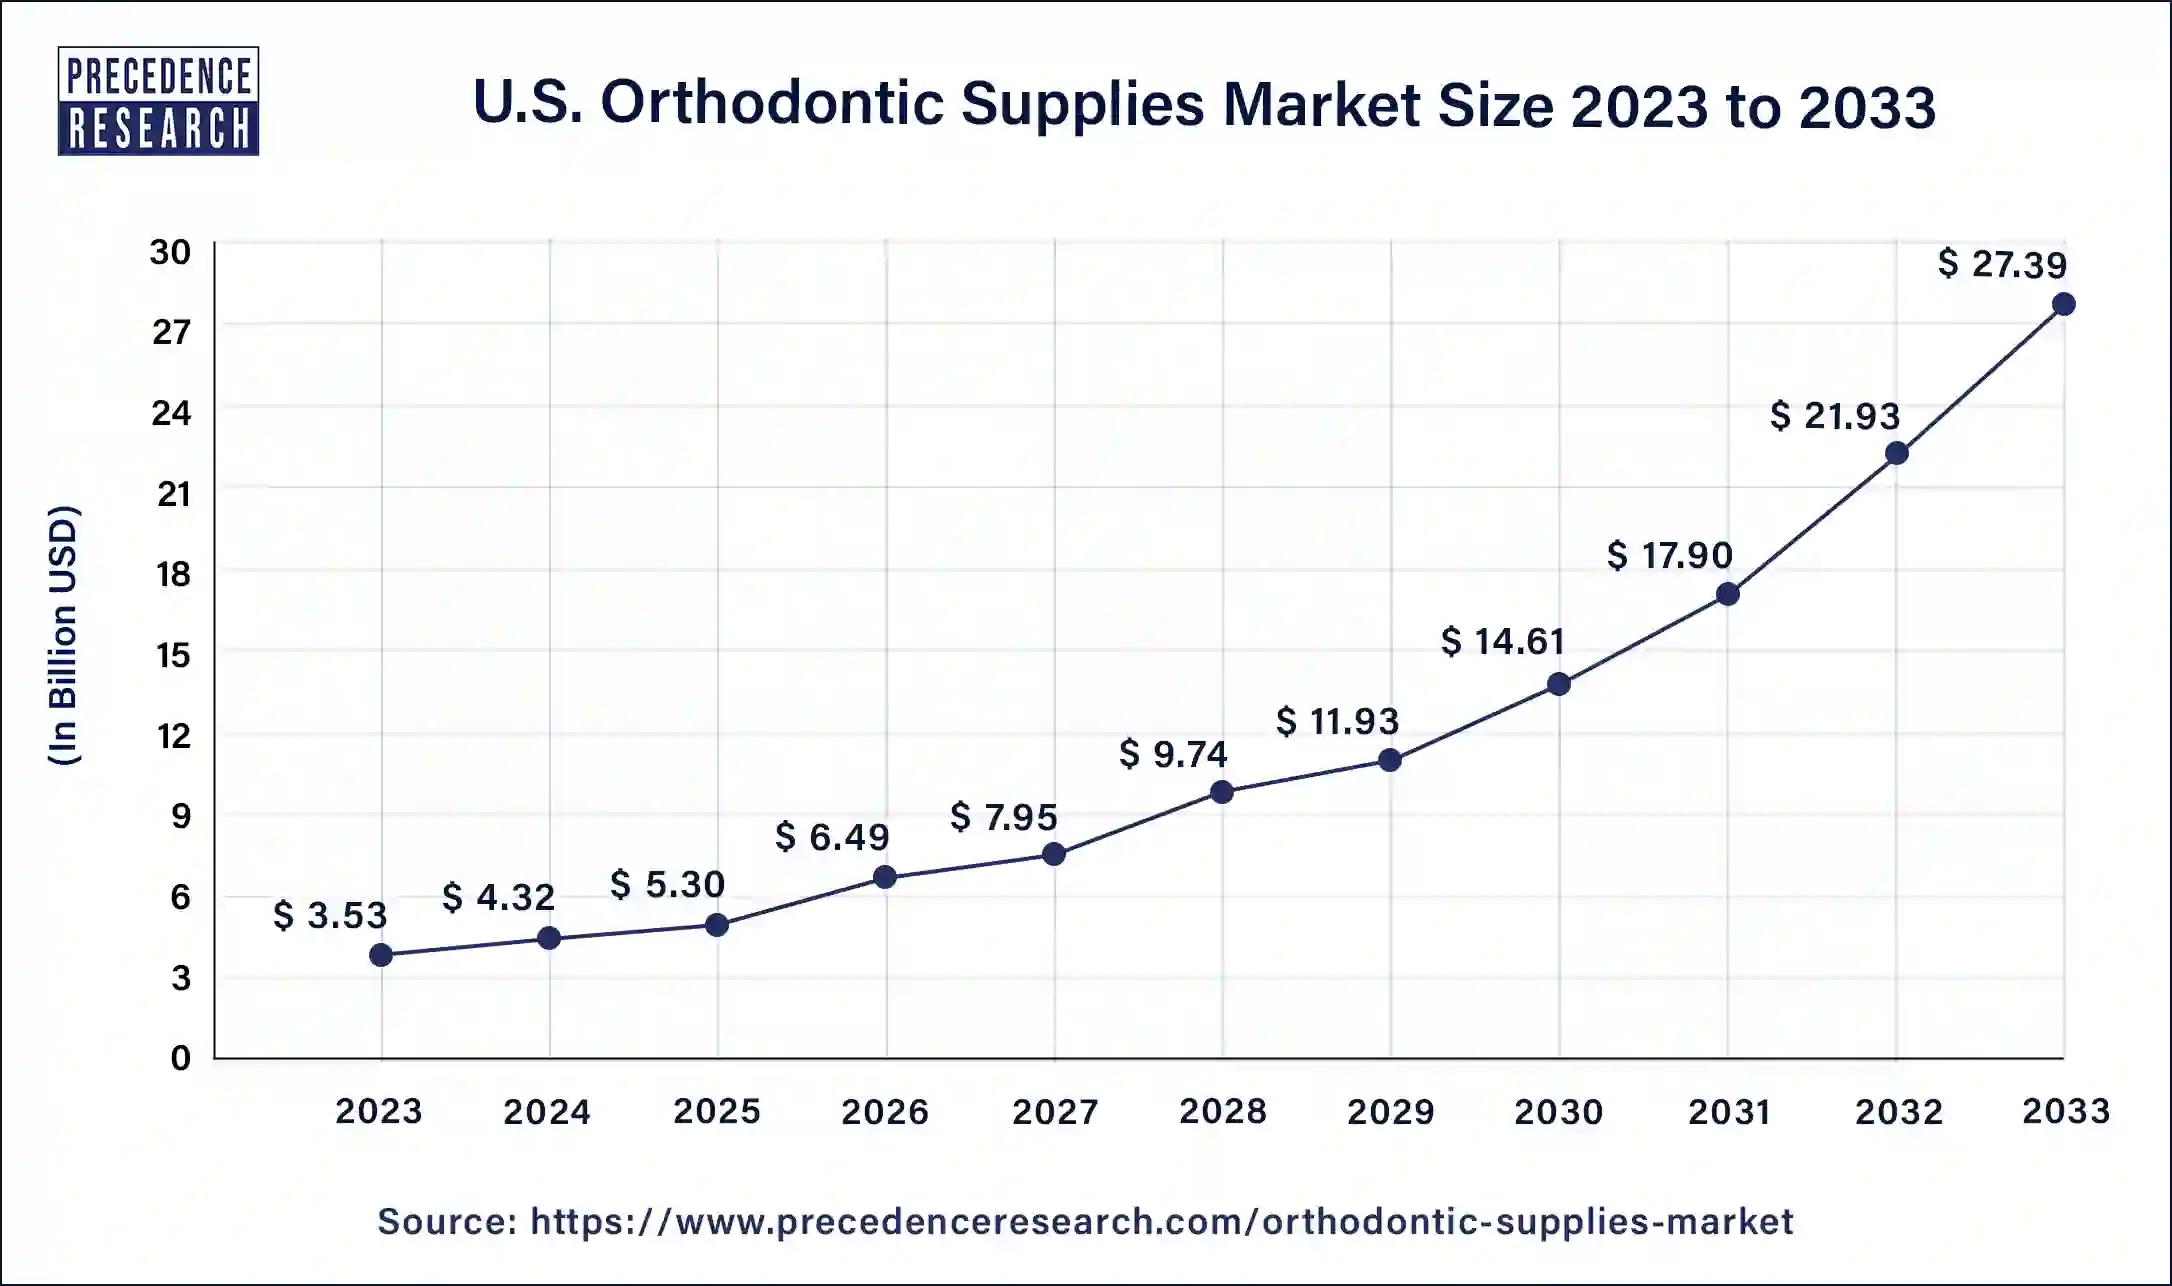 U.S. Orthodontic Supplies Market Size 2024 to 2033